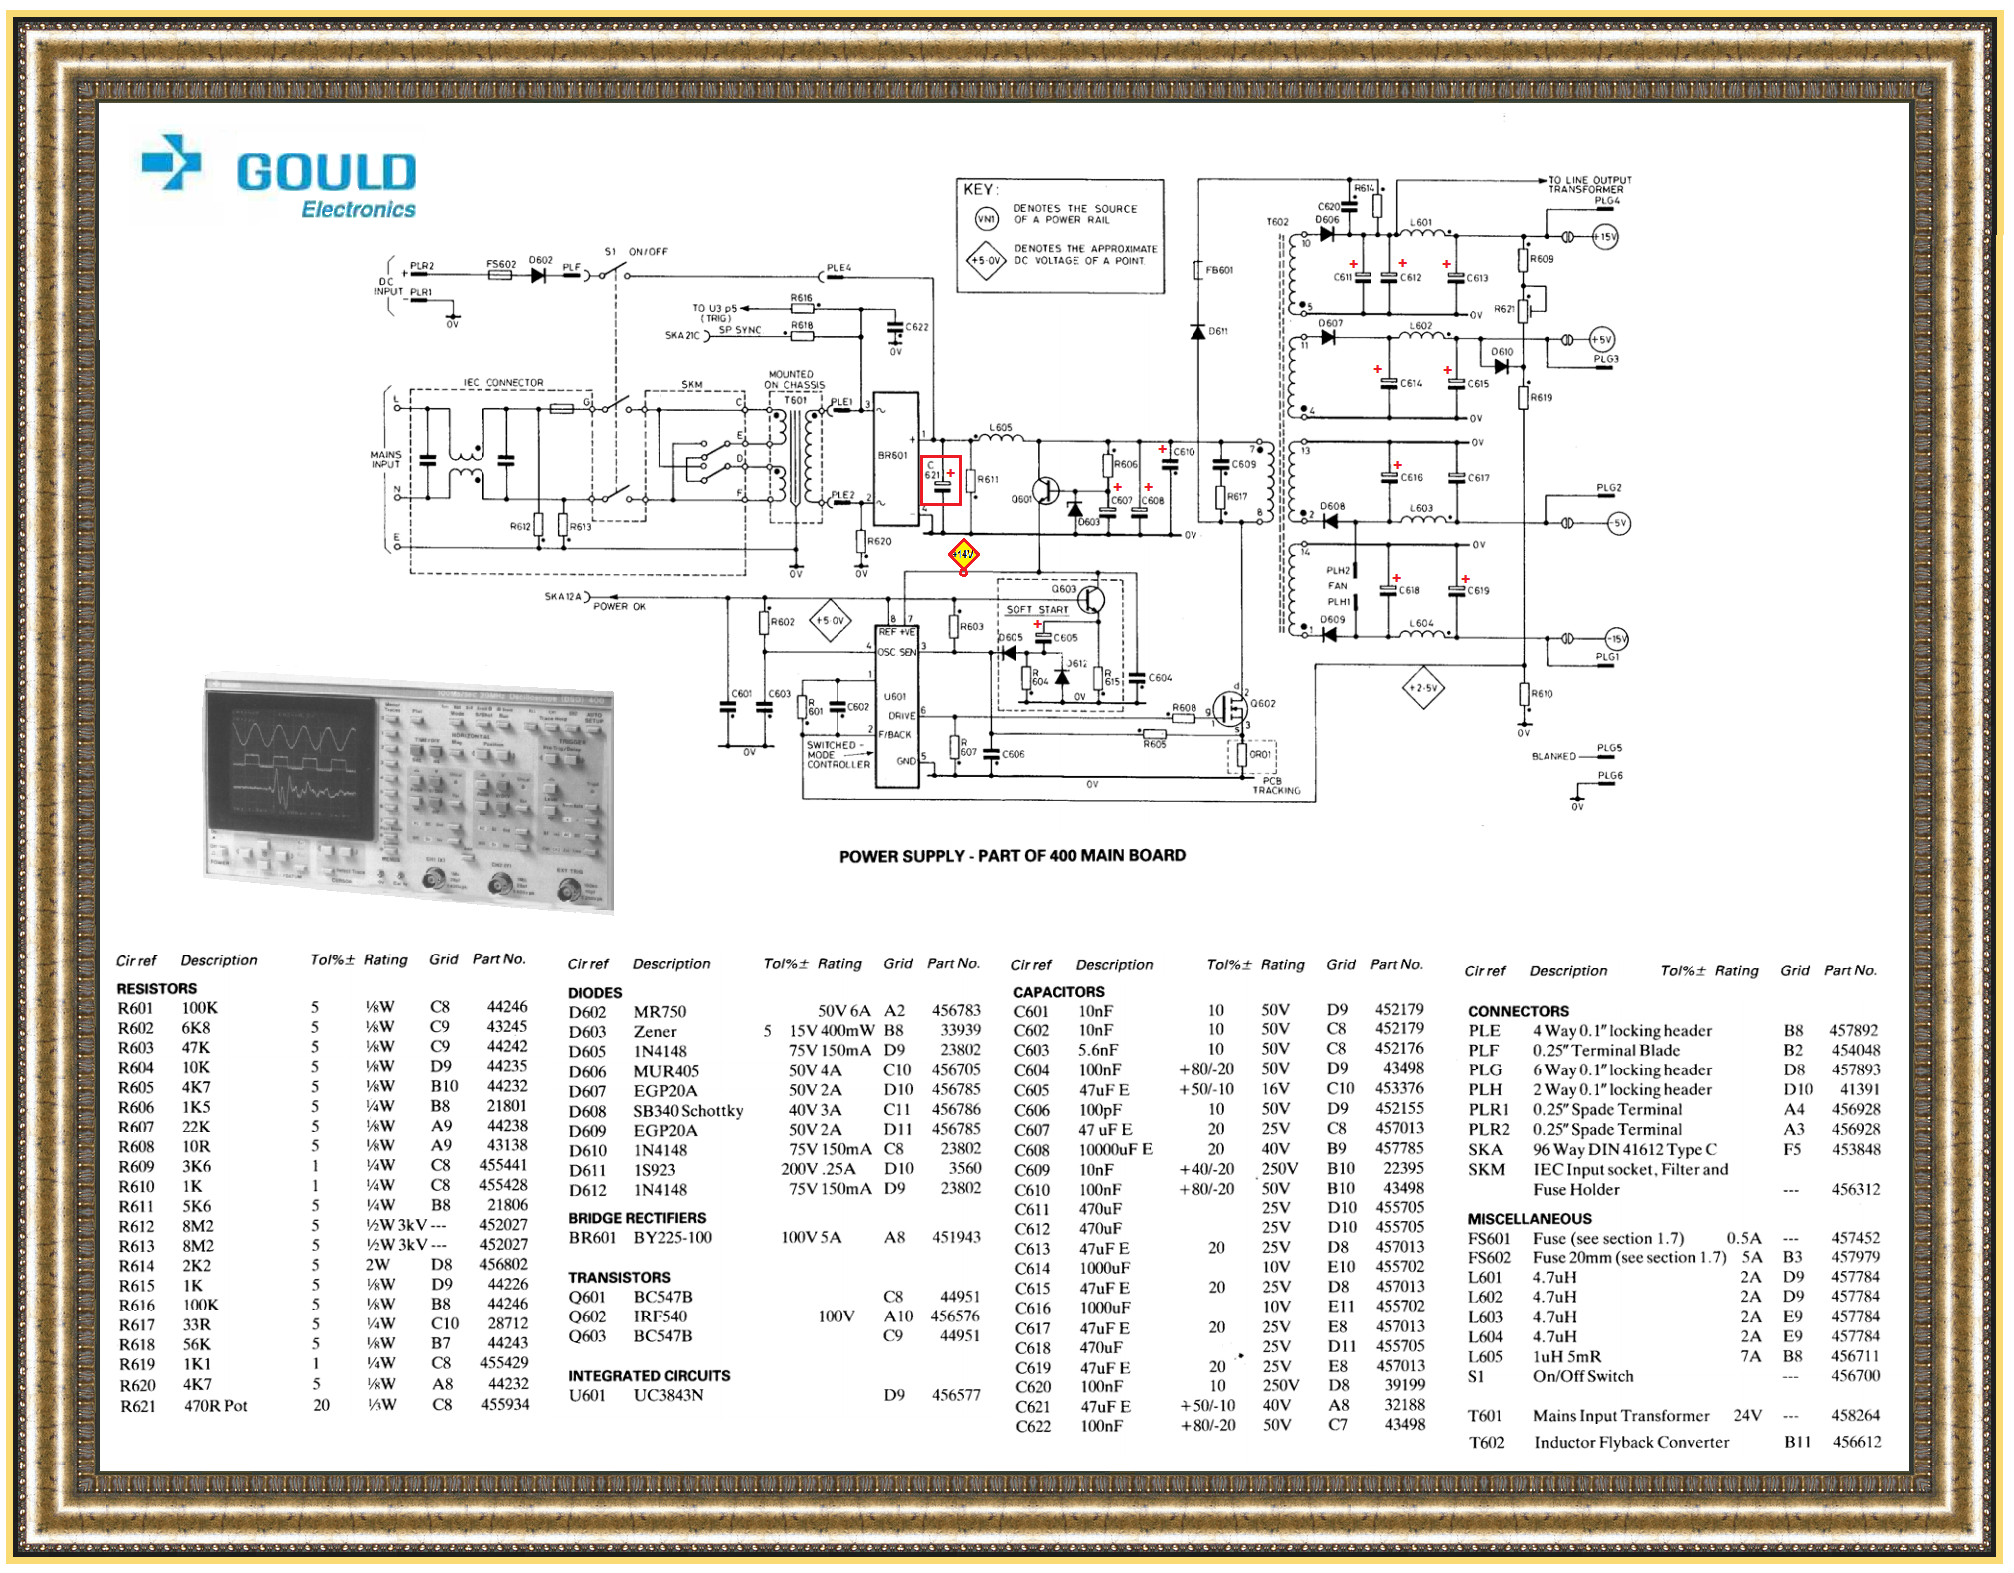 GOULD-400-Series-Power-Supply.png